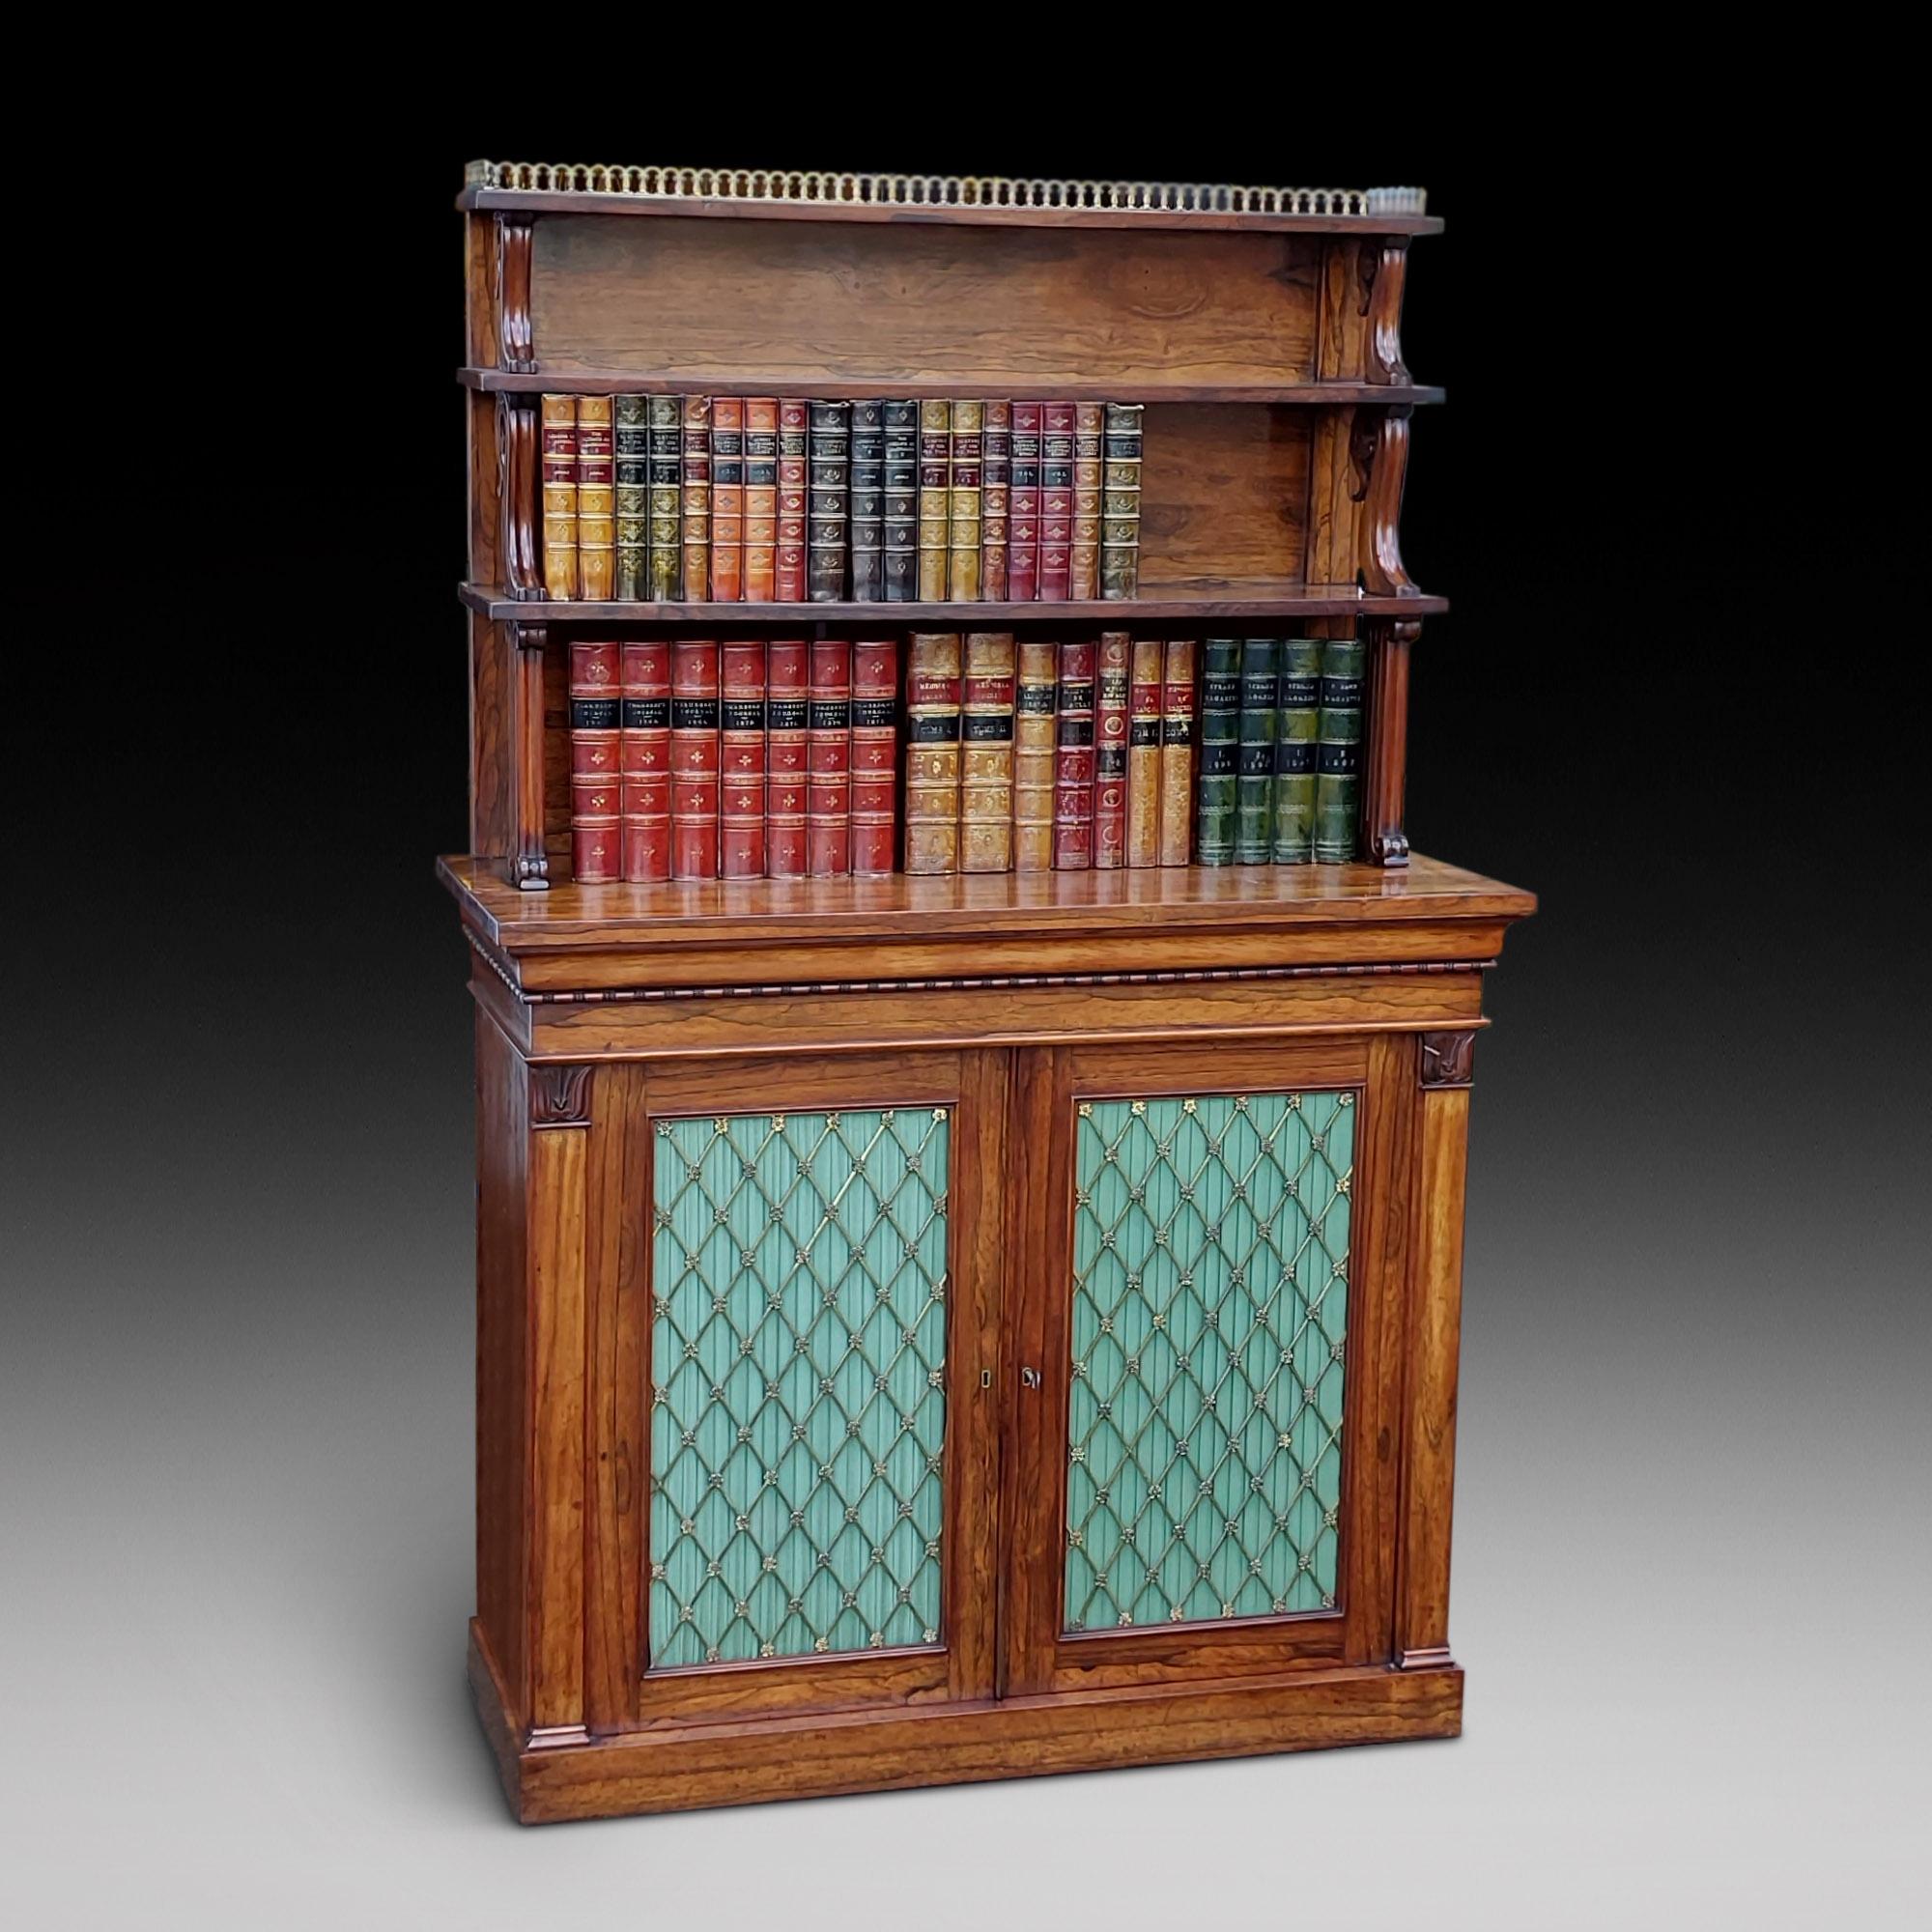 Holland & Son, Late Regency Rosewood Waterfall Bookcase/Chiffoniere with Scroll Supports, Brass Grill Fronted Doors on Plinth Base - 42